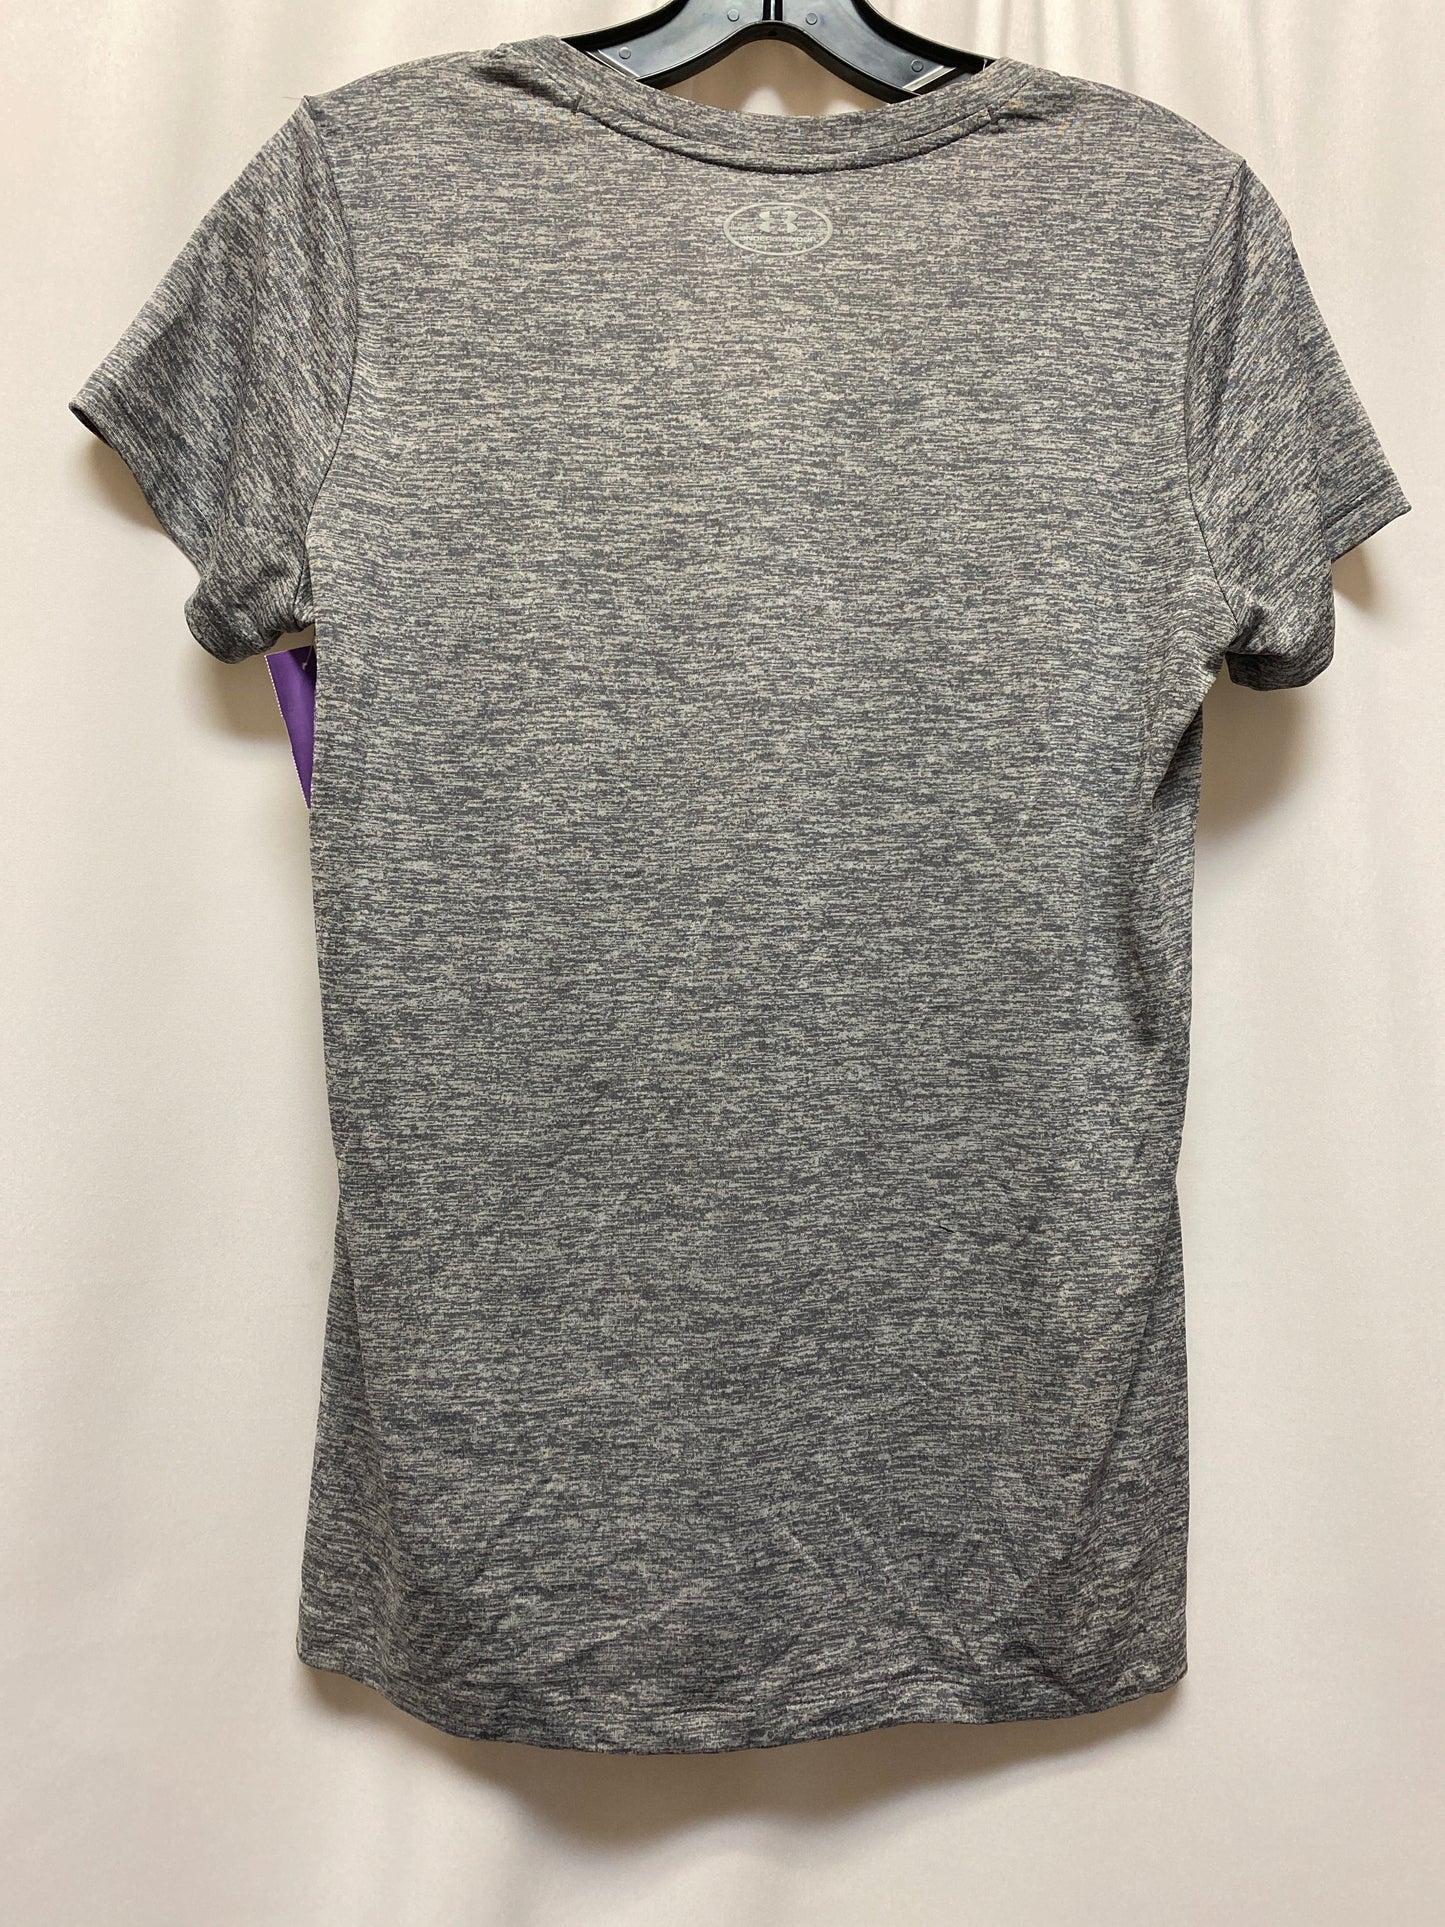 Grey Athletic Top Short Sleeve Under Armour, Size S